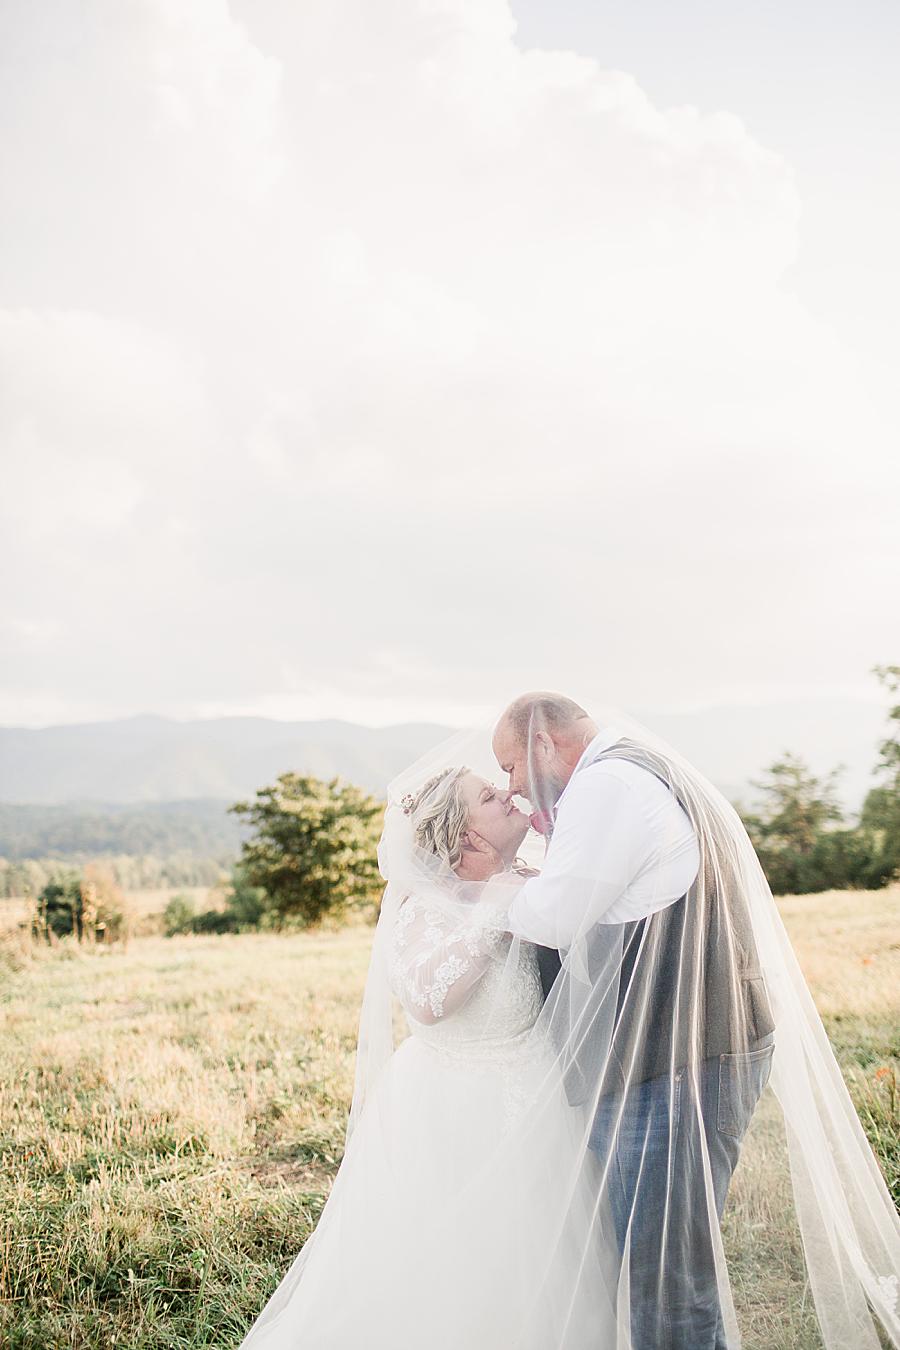 Under the veil by Knoxville Wedding Photographer, Amanda May Photos.